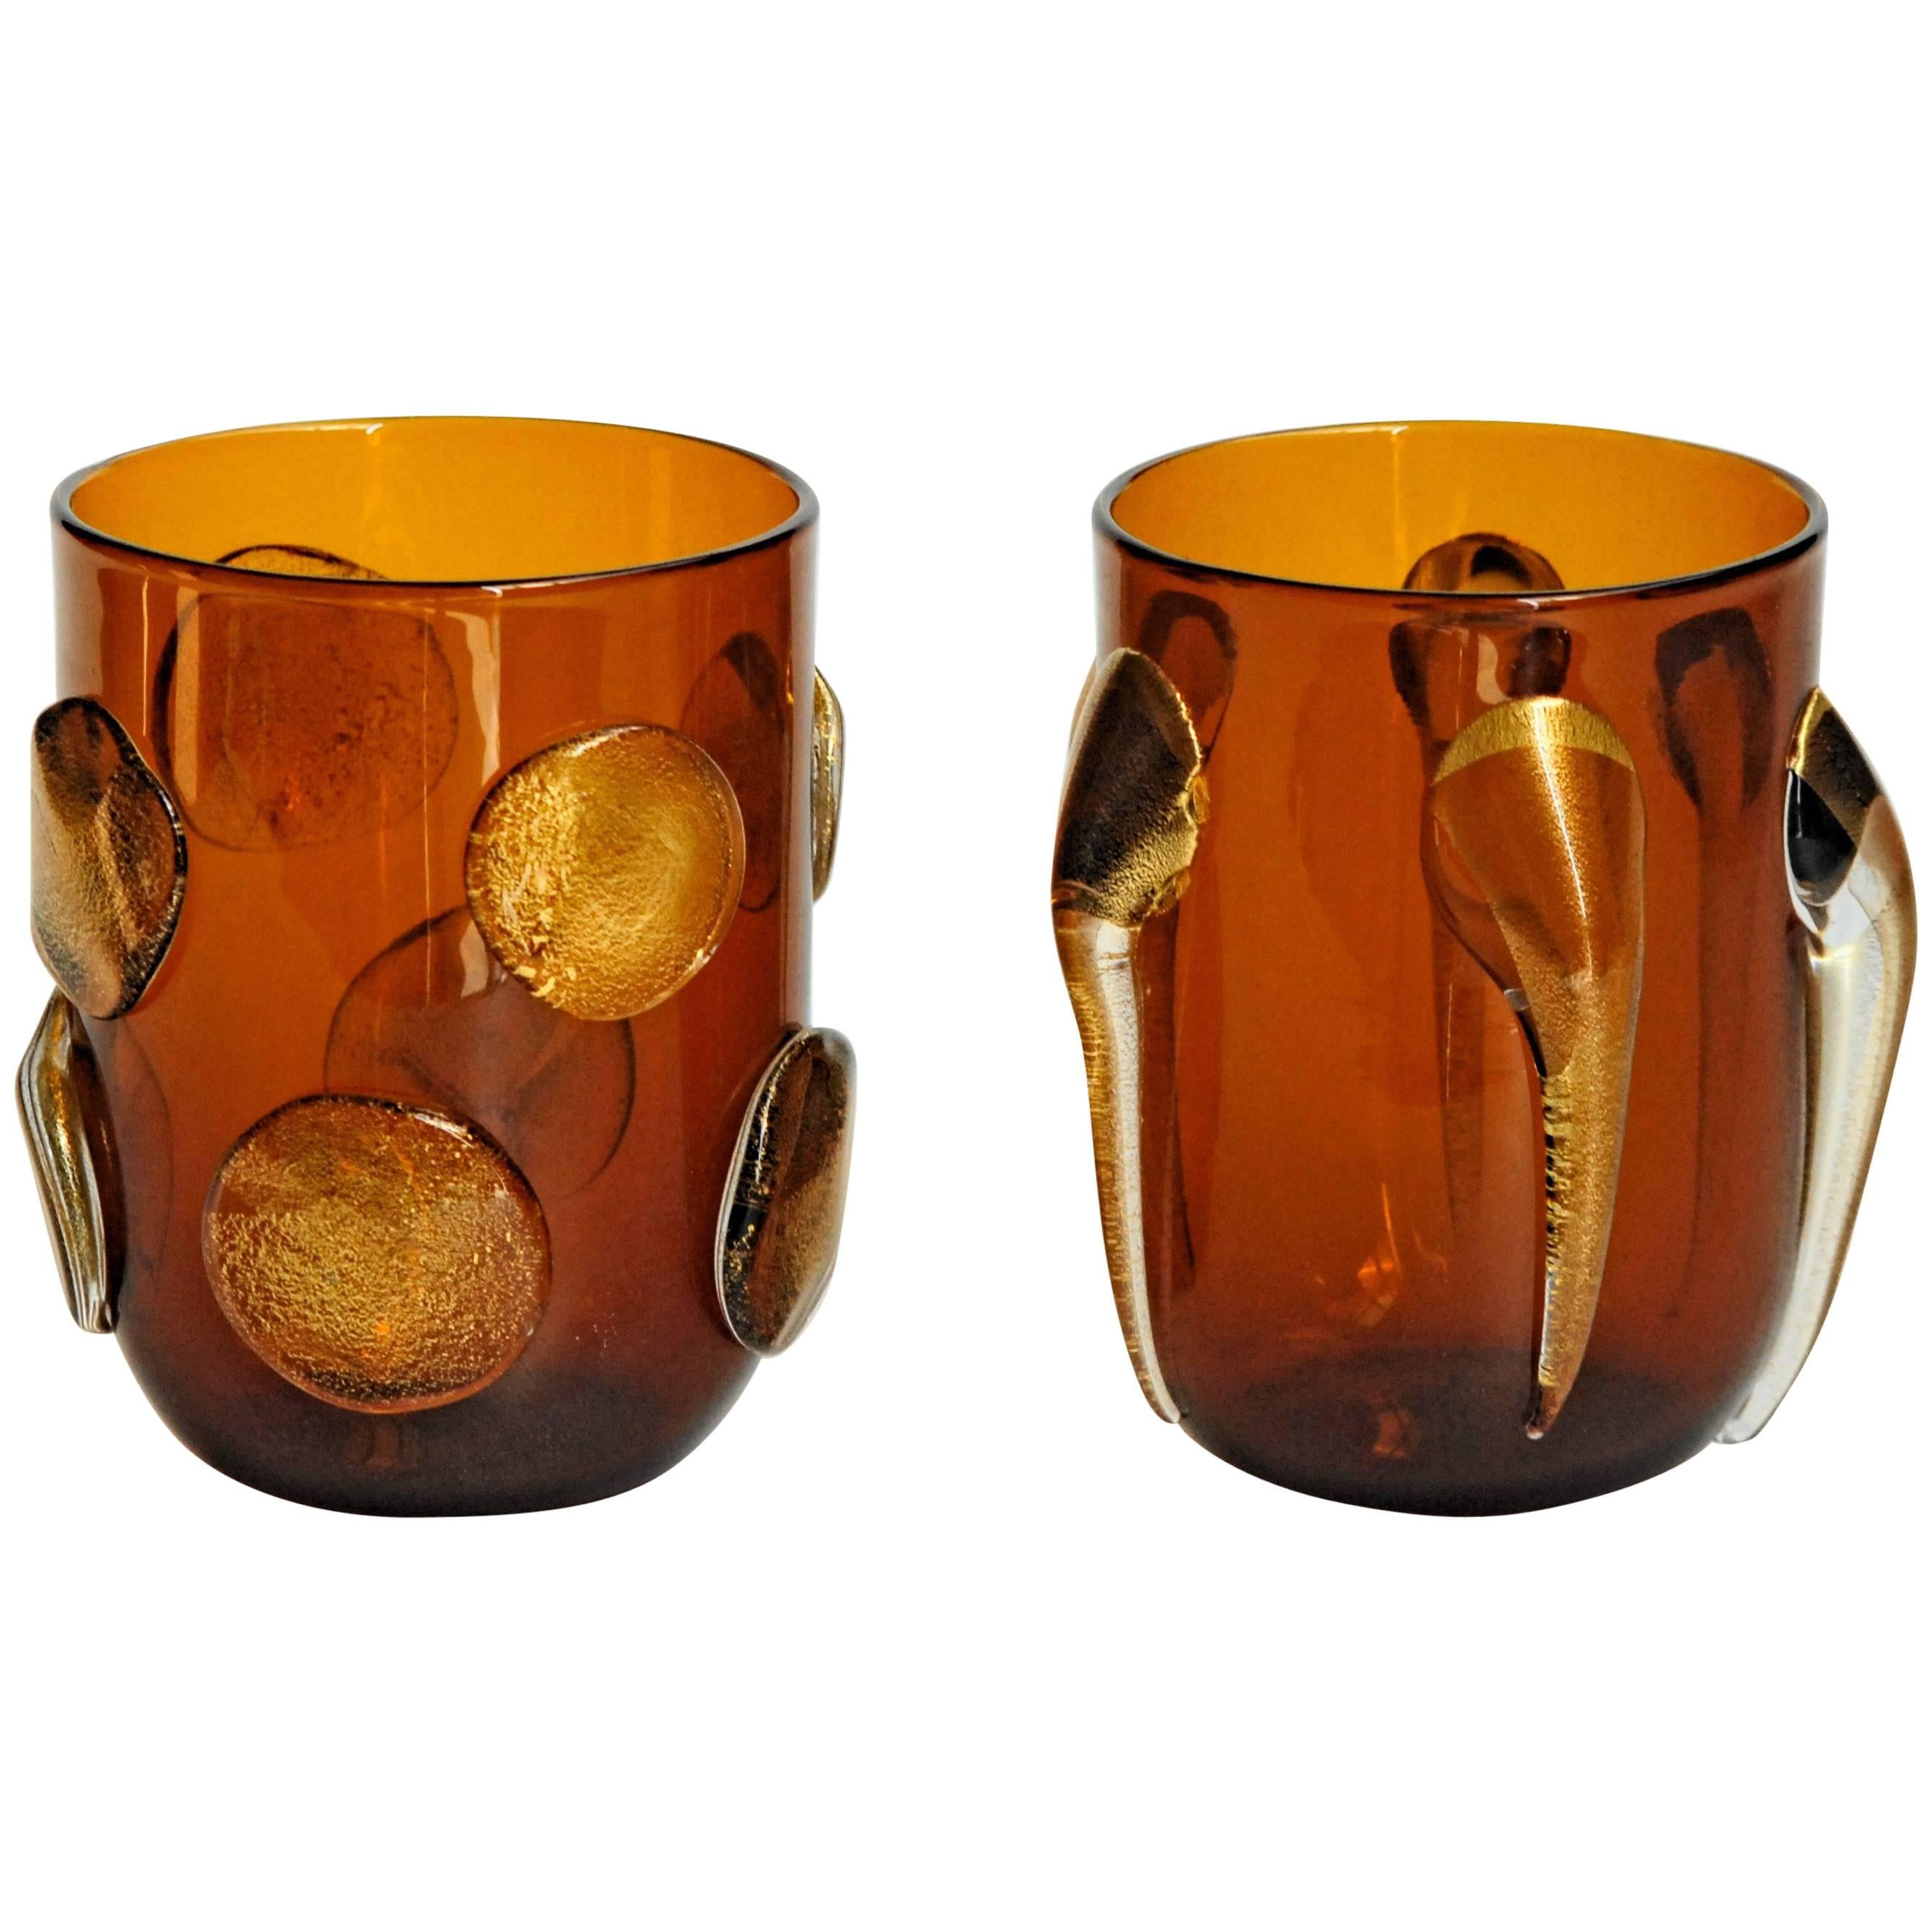 Six Tumblers, Gold Leaf Applications on Deep Amber, Cenedese Style, Murano 1990s